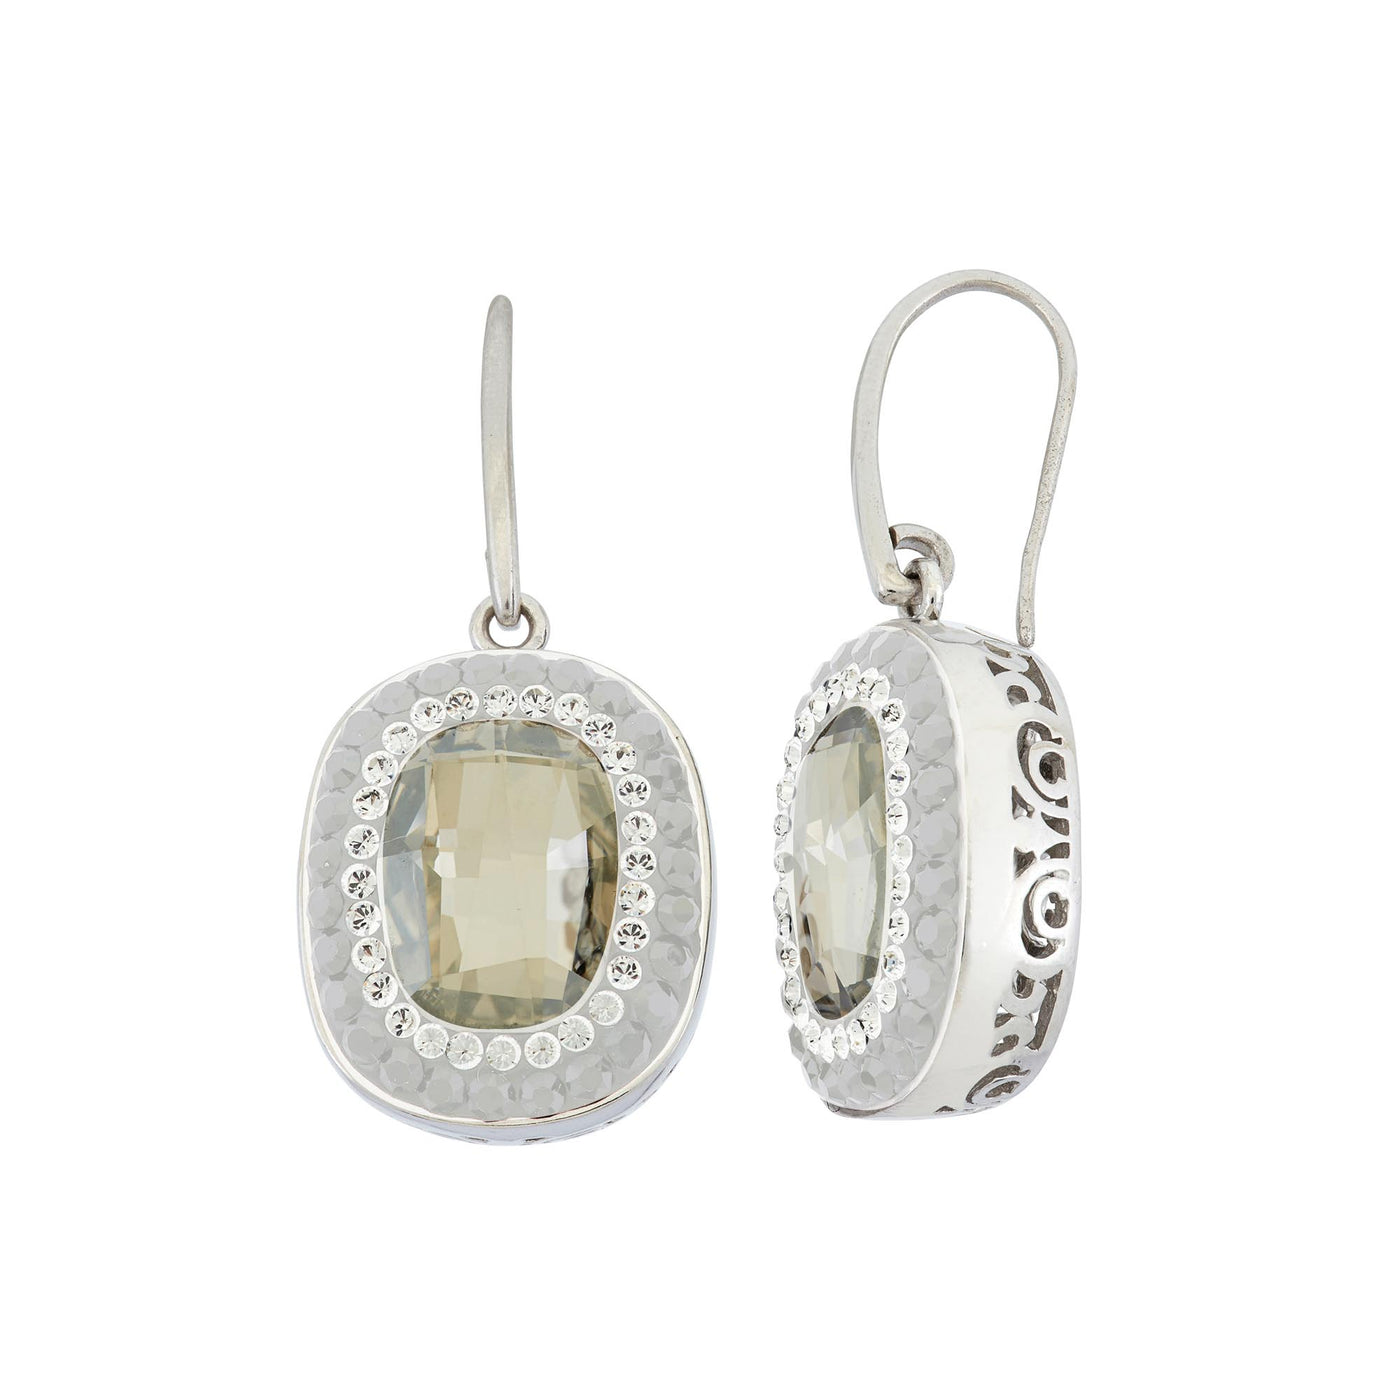 Rebecca Sloane Sterling Silver Oval Crystal & White Pave Earrings